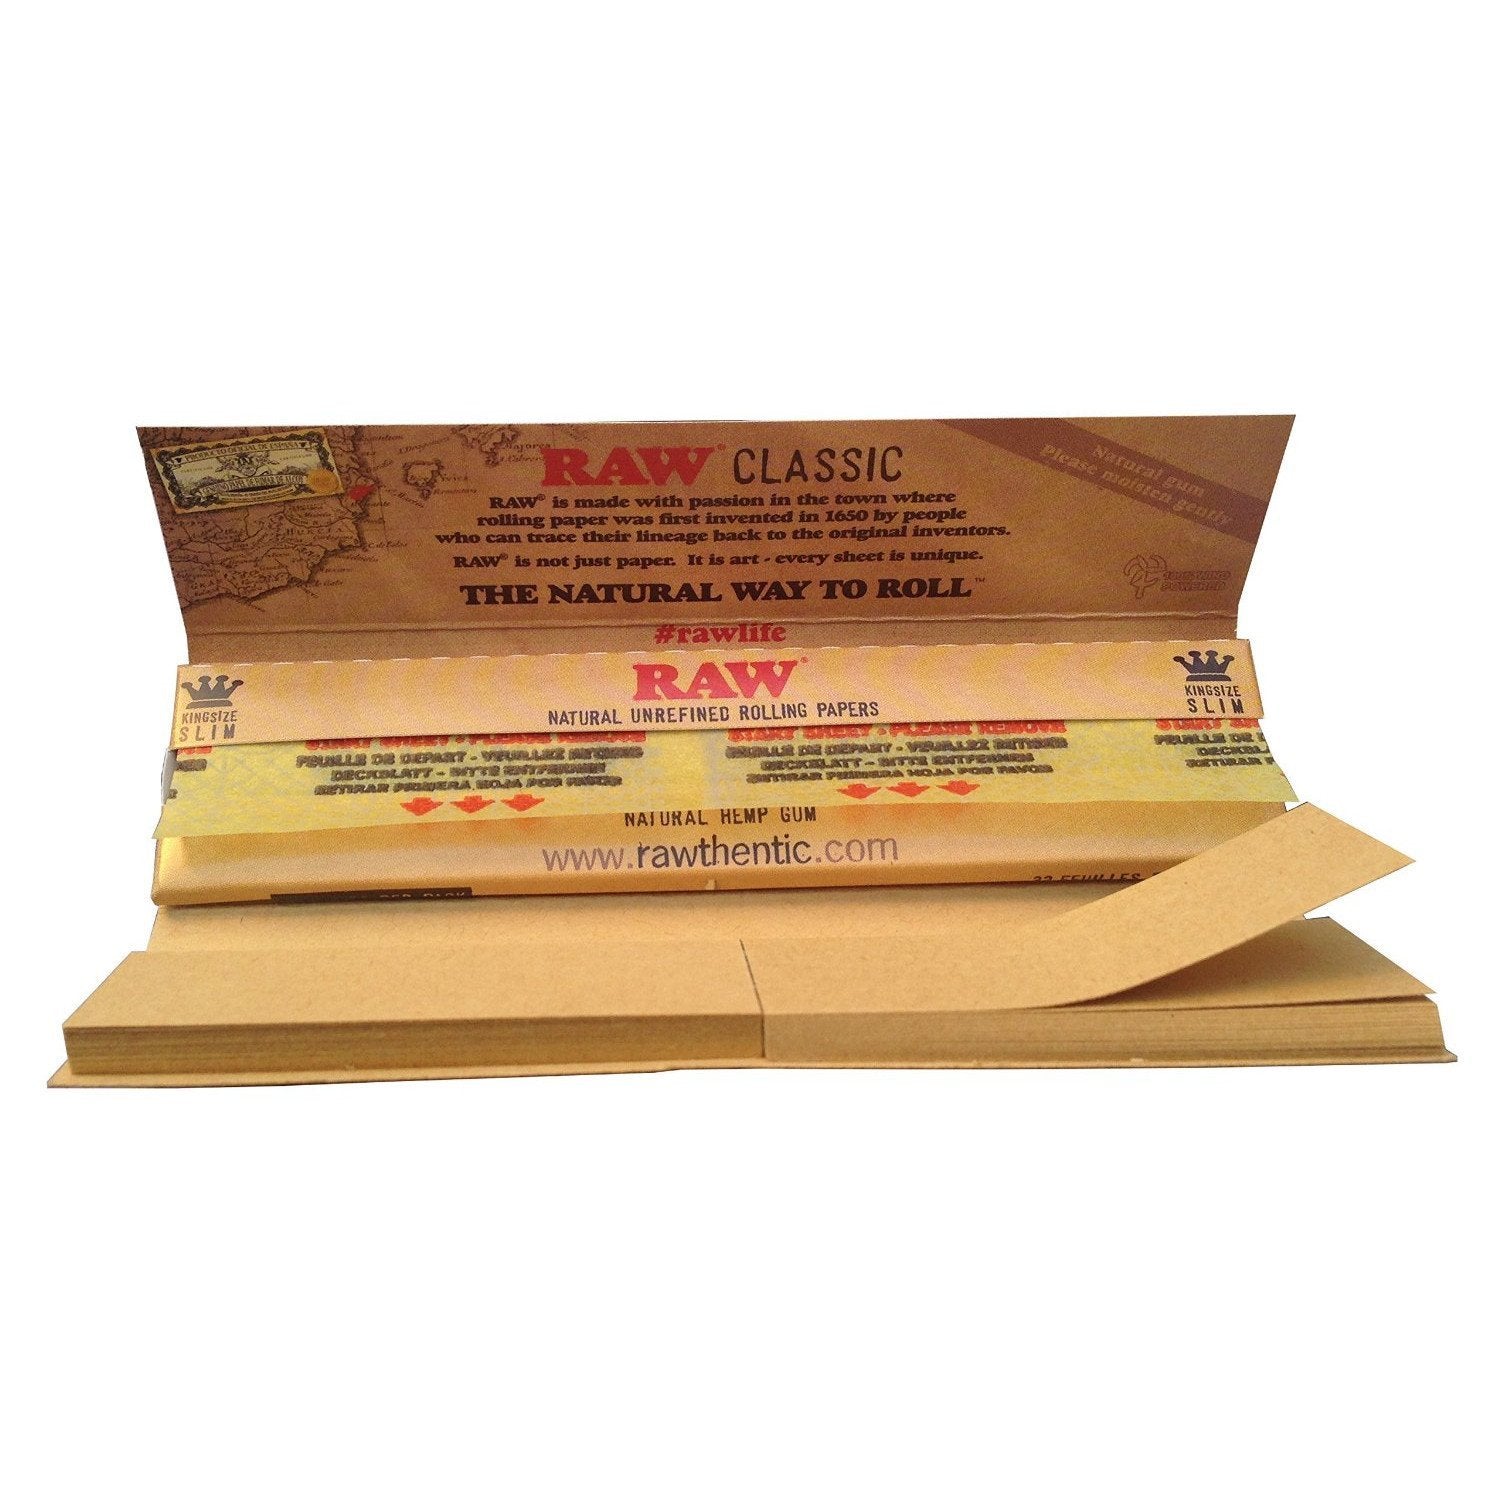 Raw Classic Connoisseur 1 1/4 + Tips 24 per Box - Smoker's World of Hollywood